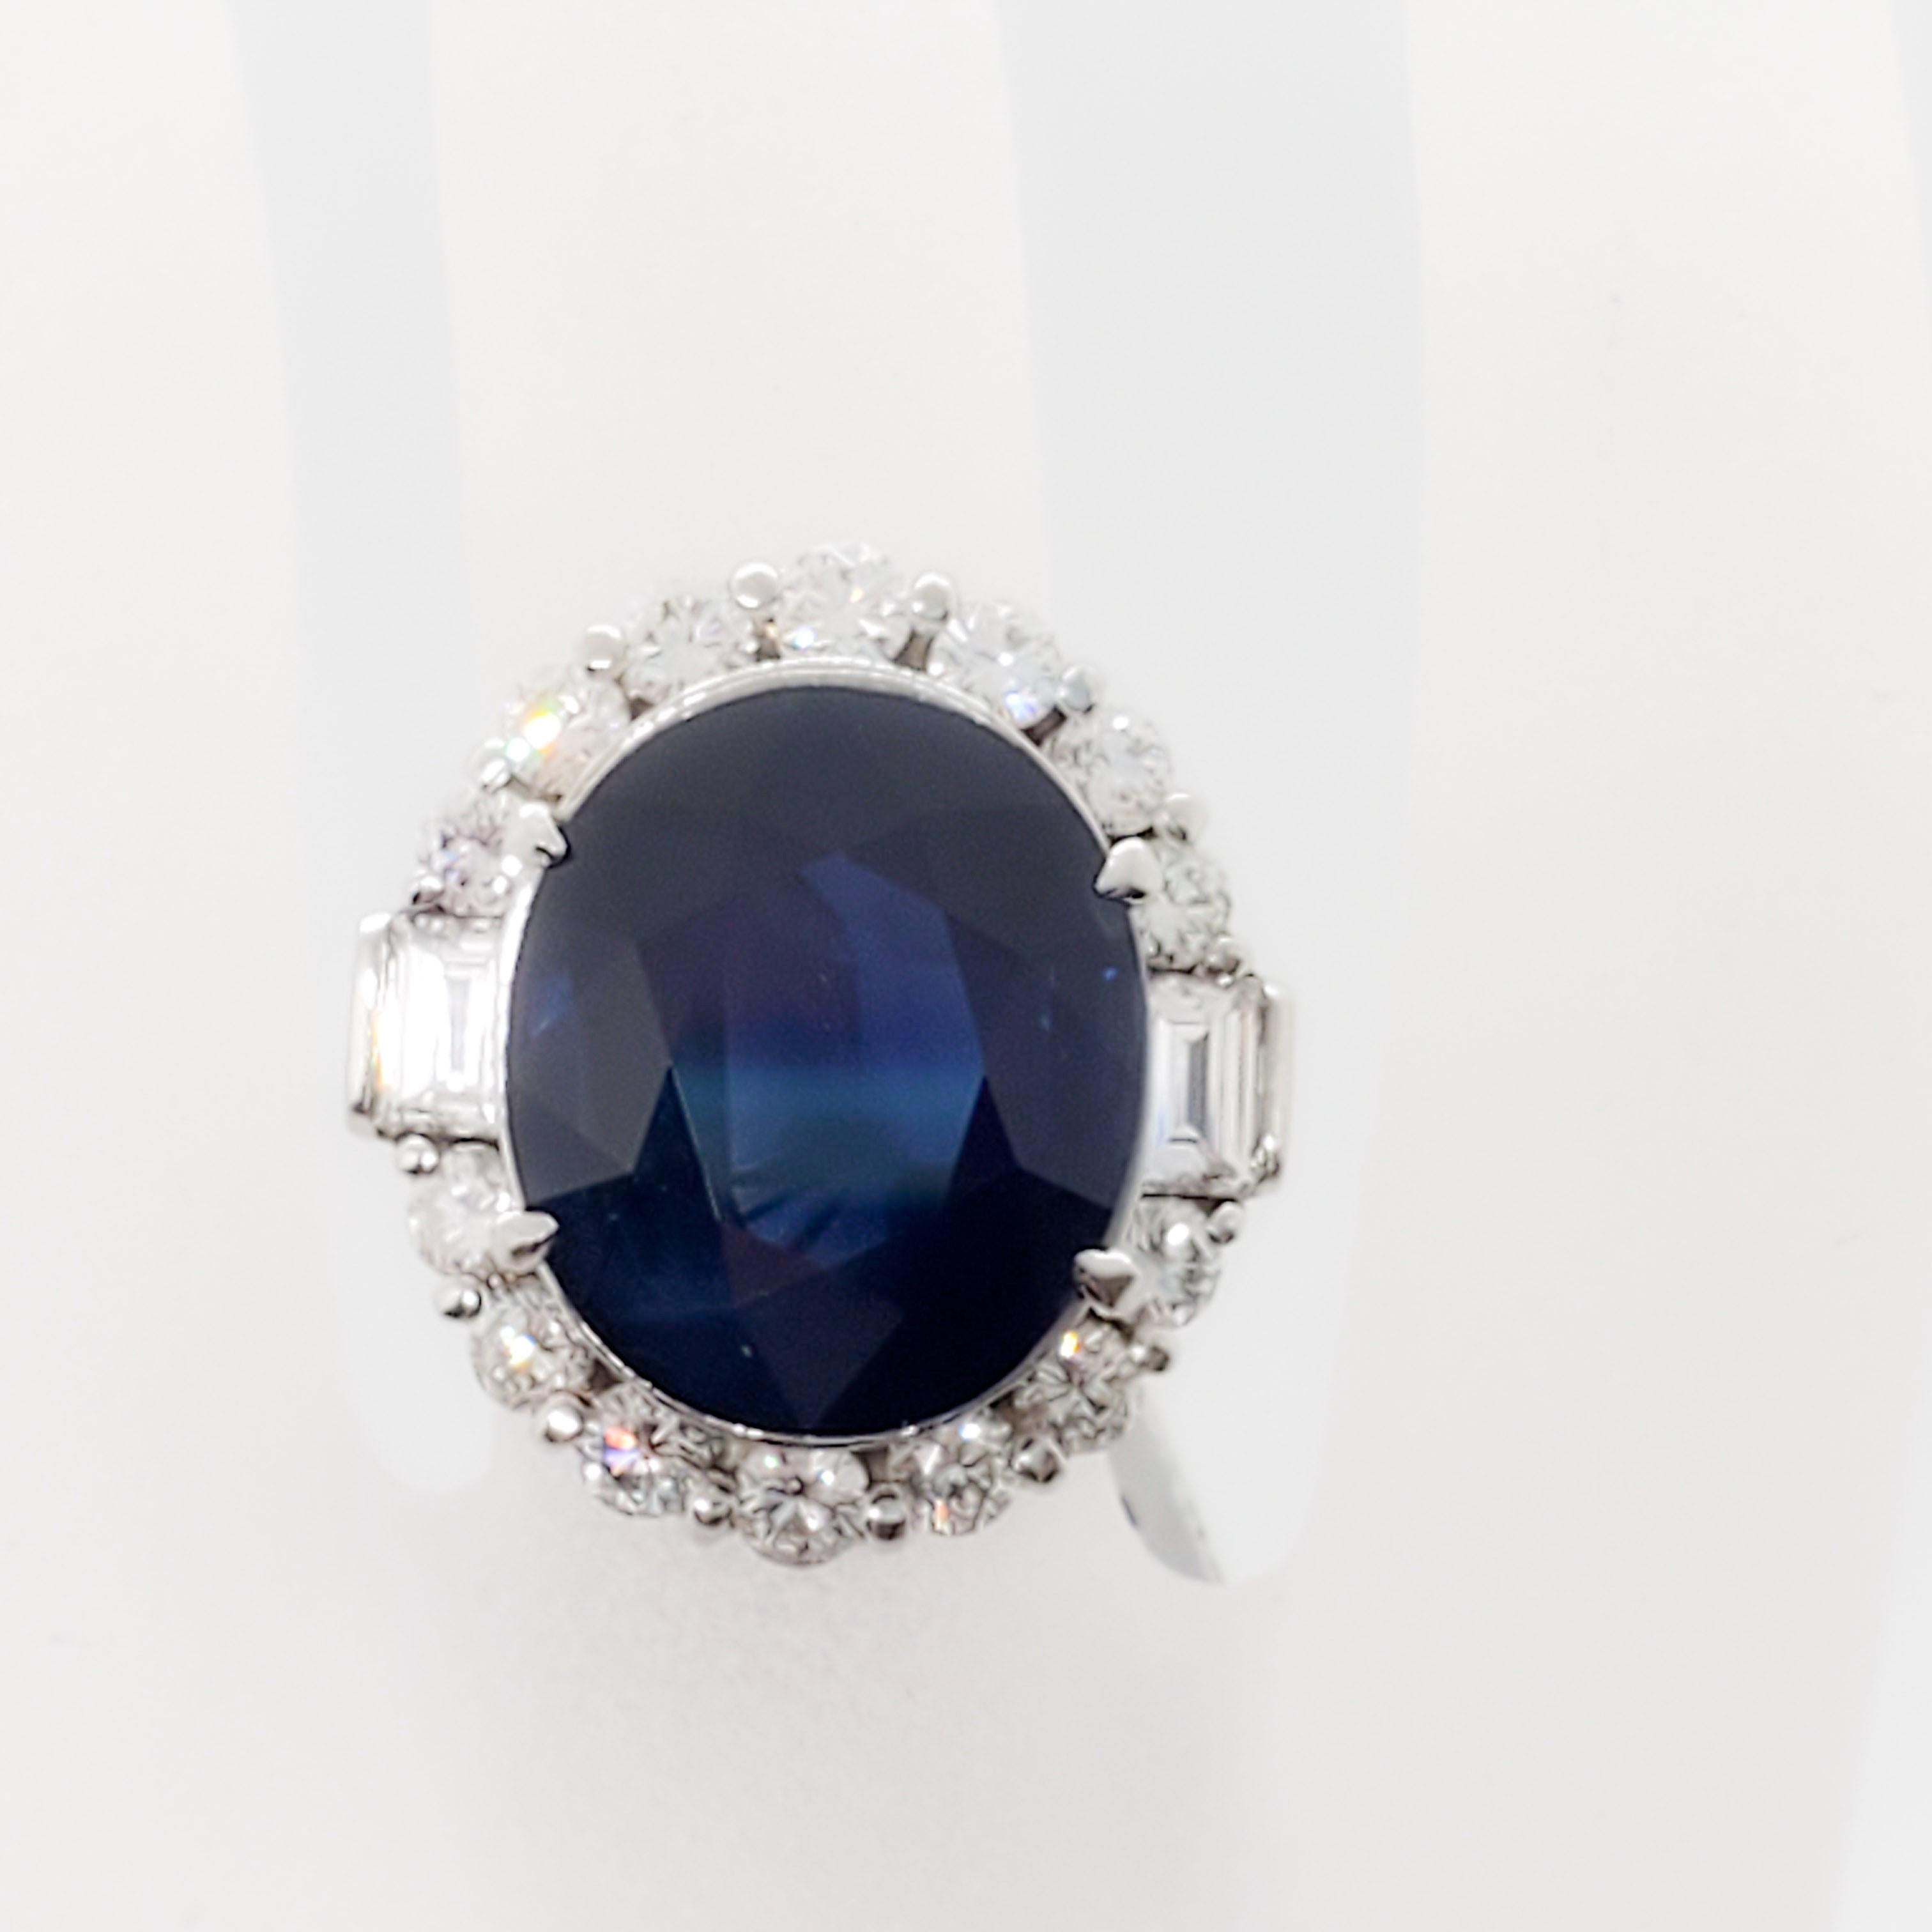 Women's or Men's Blue Sapphire Oval and White Diamond Cocktail Ring in Platinum